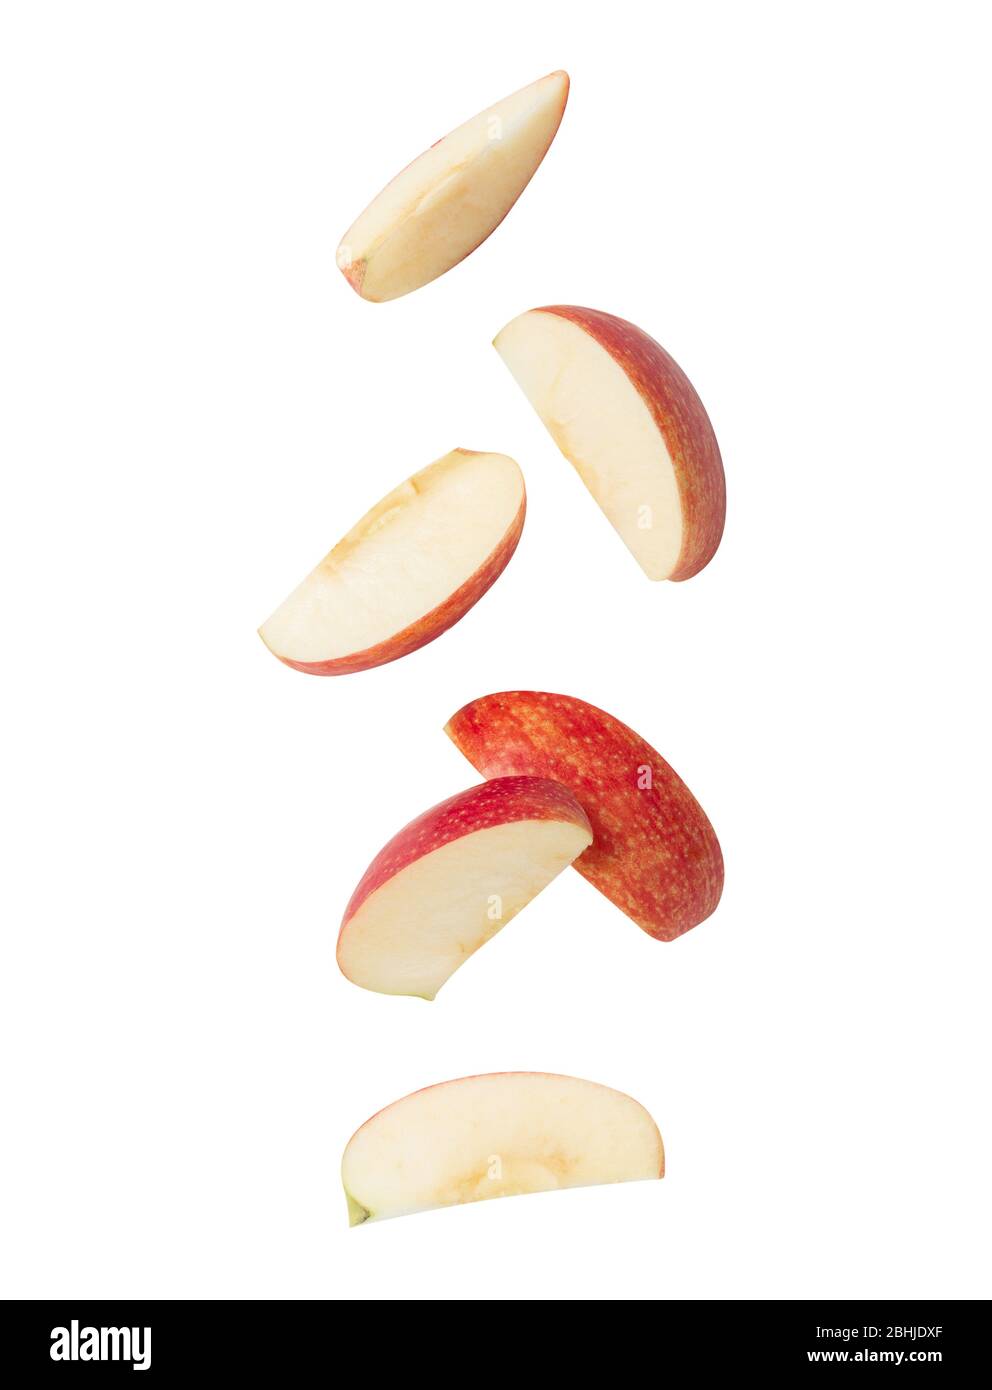 https://c8.alamy.com/comp/2BHJDXF/falling-red-apple-slice-isolated-on-white-background-with-clipping-path-2BHJDXF.jpg